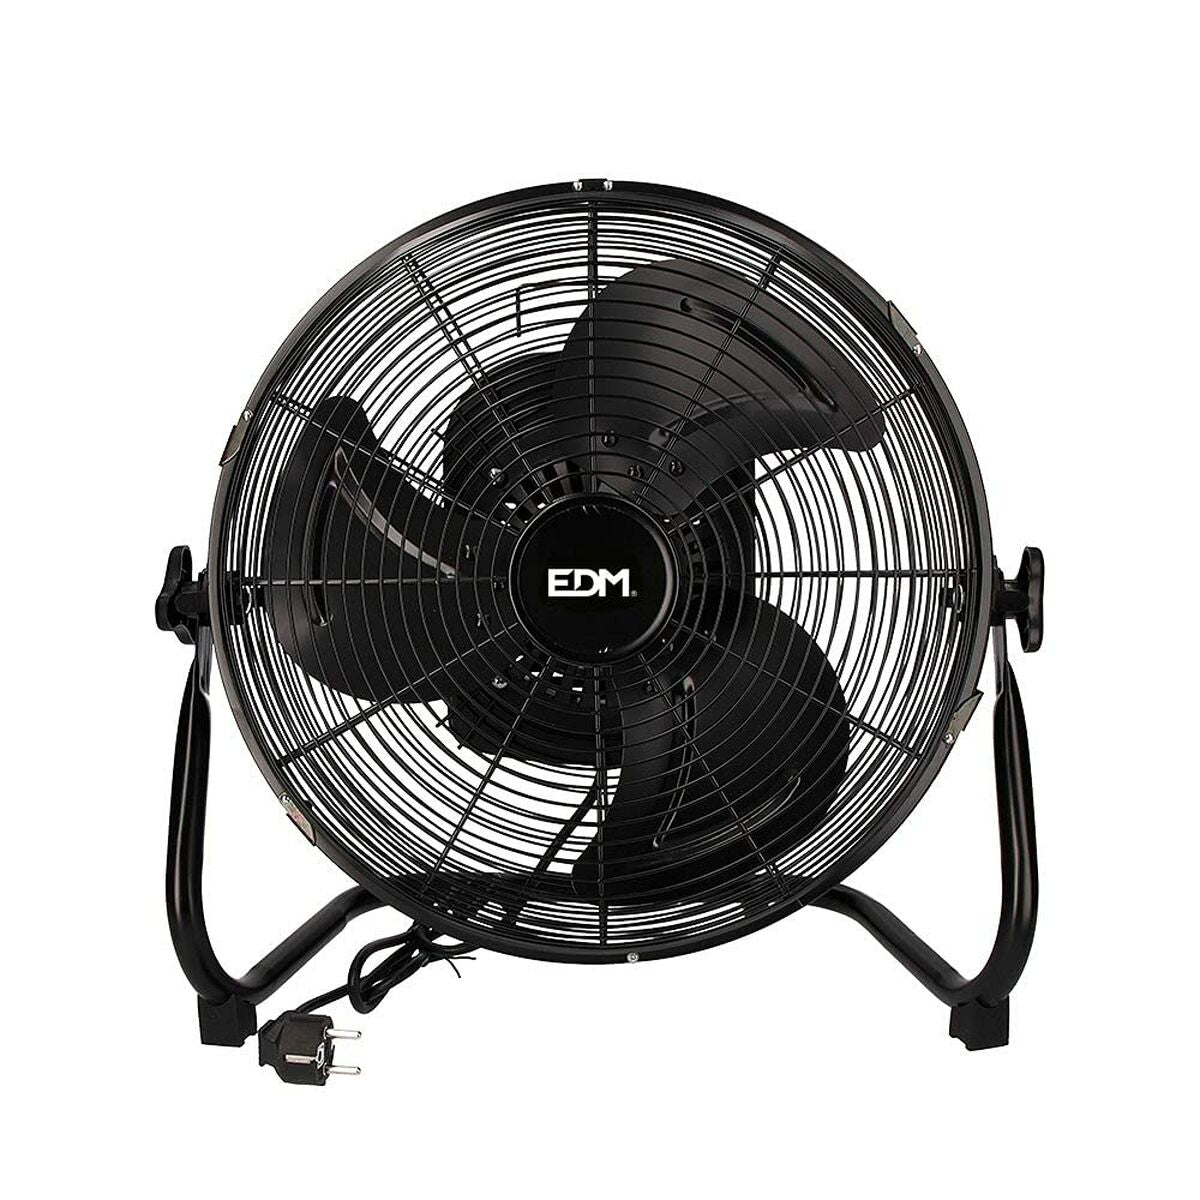 Floor Fan EDM industrial Oscillation Black 60 W Ø 40 x 51,5 cm, EDM, Home and cooking, Portable air conditioning, floor-fan-edm-industrial-oscillation-black-60-w-o-40-x-51-5-cm, Brand_EDM, category-reference-2399, category-reference-2450, category-reference-2451, category-reference-t-19656, category-reference-t-21087, category-reference-t-25217, Condition_NEW, ferretería, Price_50 - 100, summer, RiotNook